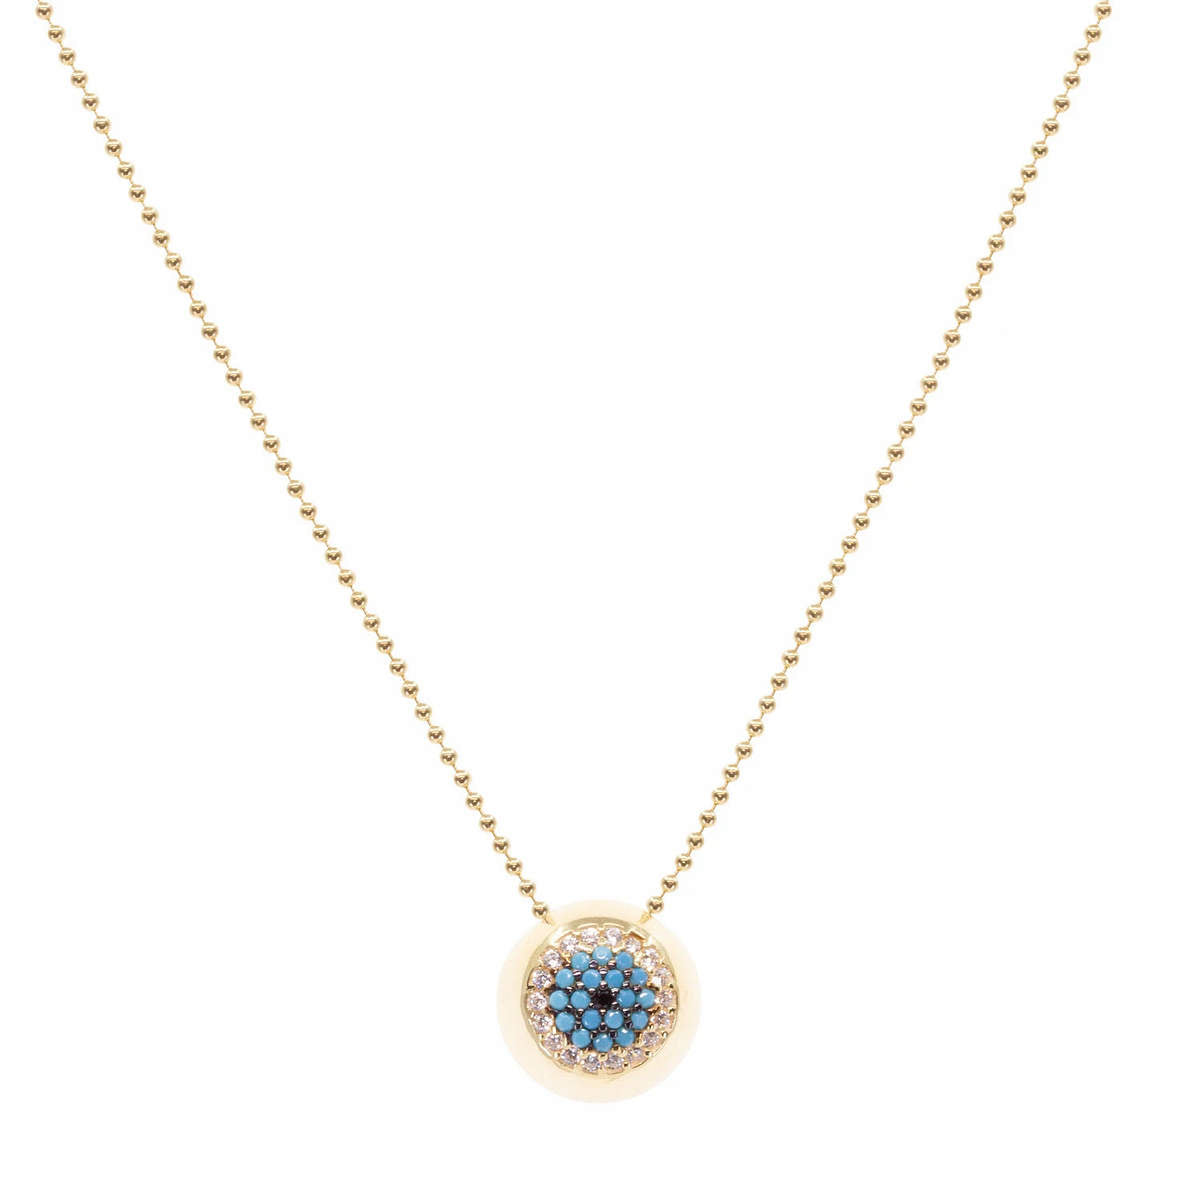 Wide-Eyed Crystal Pavé Necklace in Turquoise